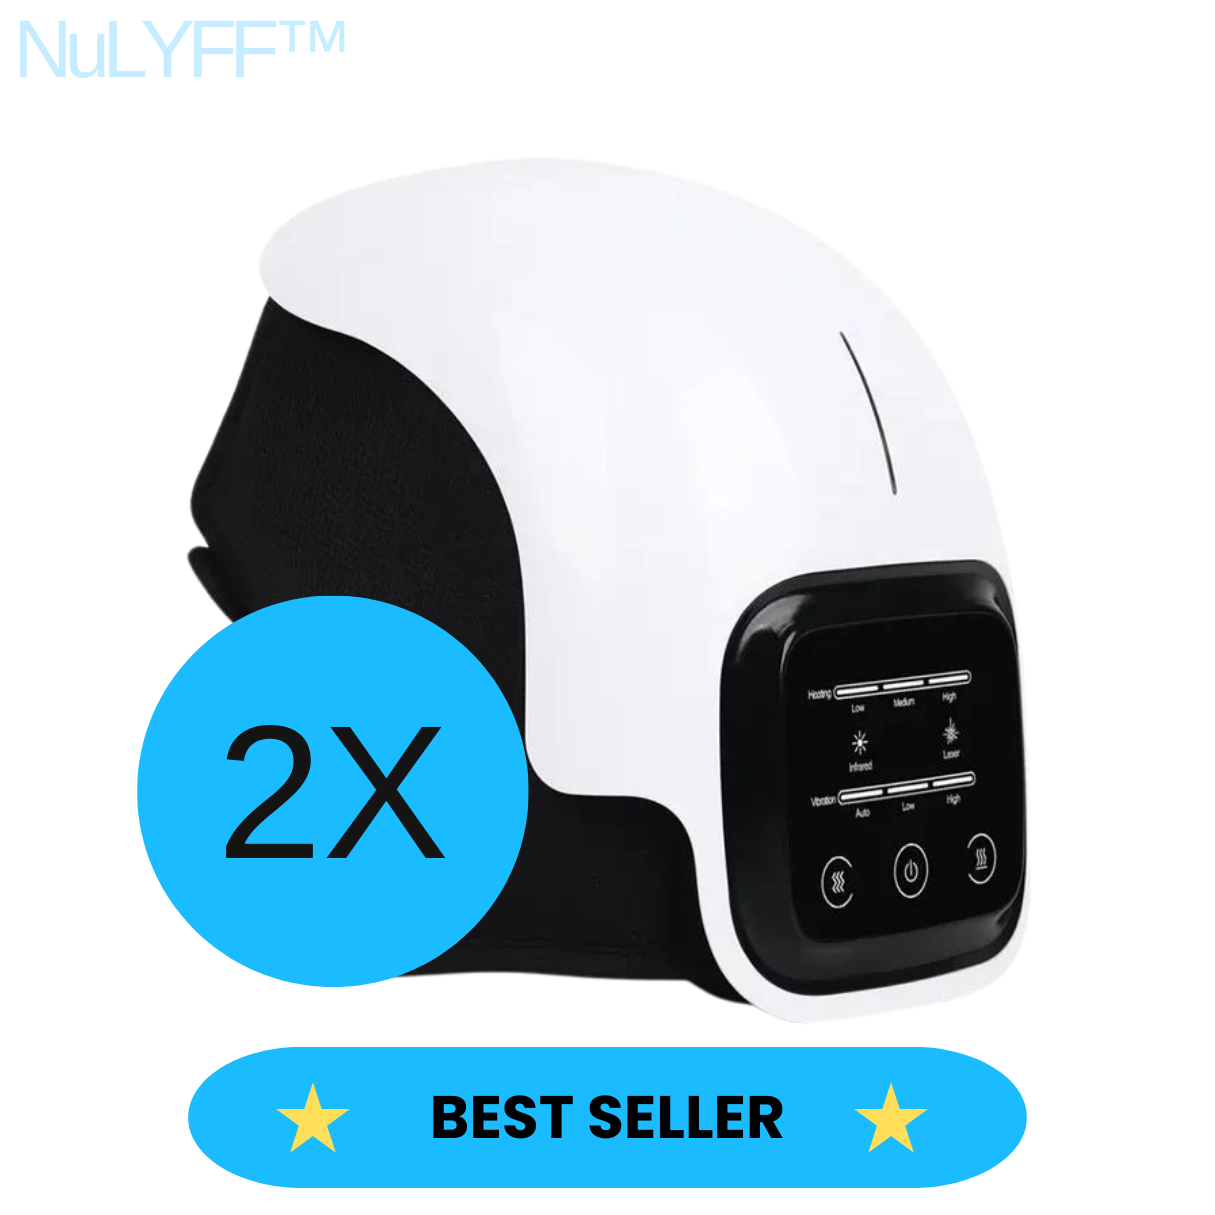 Image of 2X two units NuLYFF™ Knee Massager - Best Seller, free shipping, 30 day money back guarantee